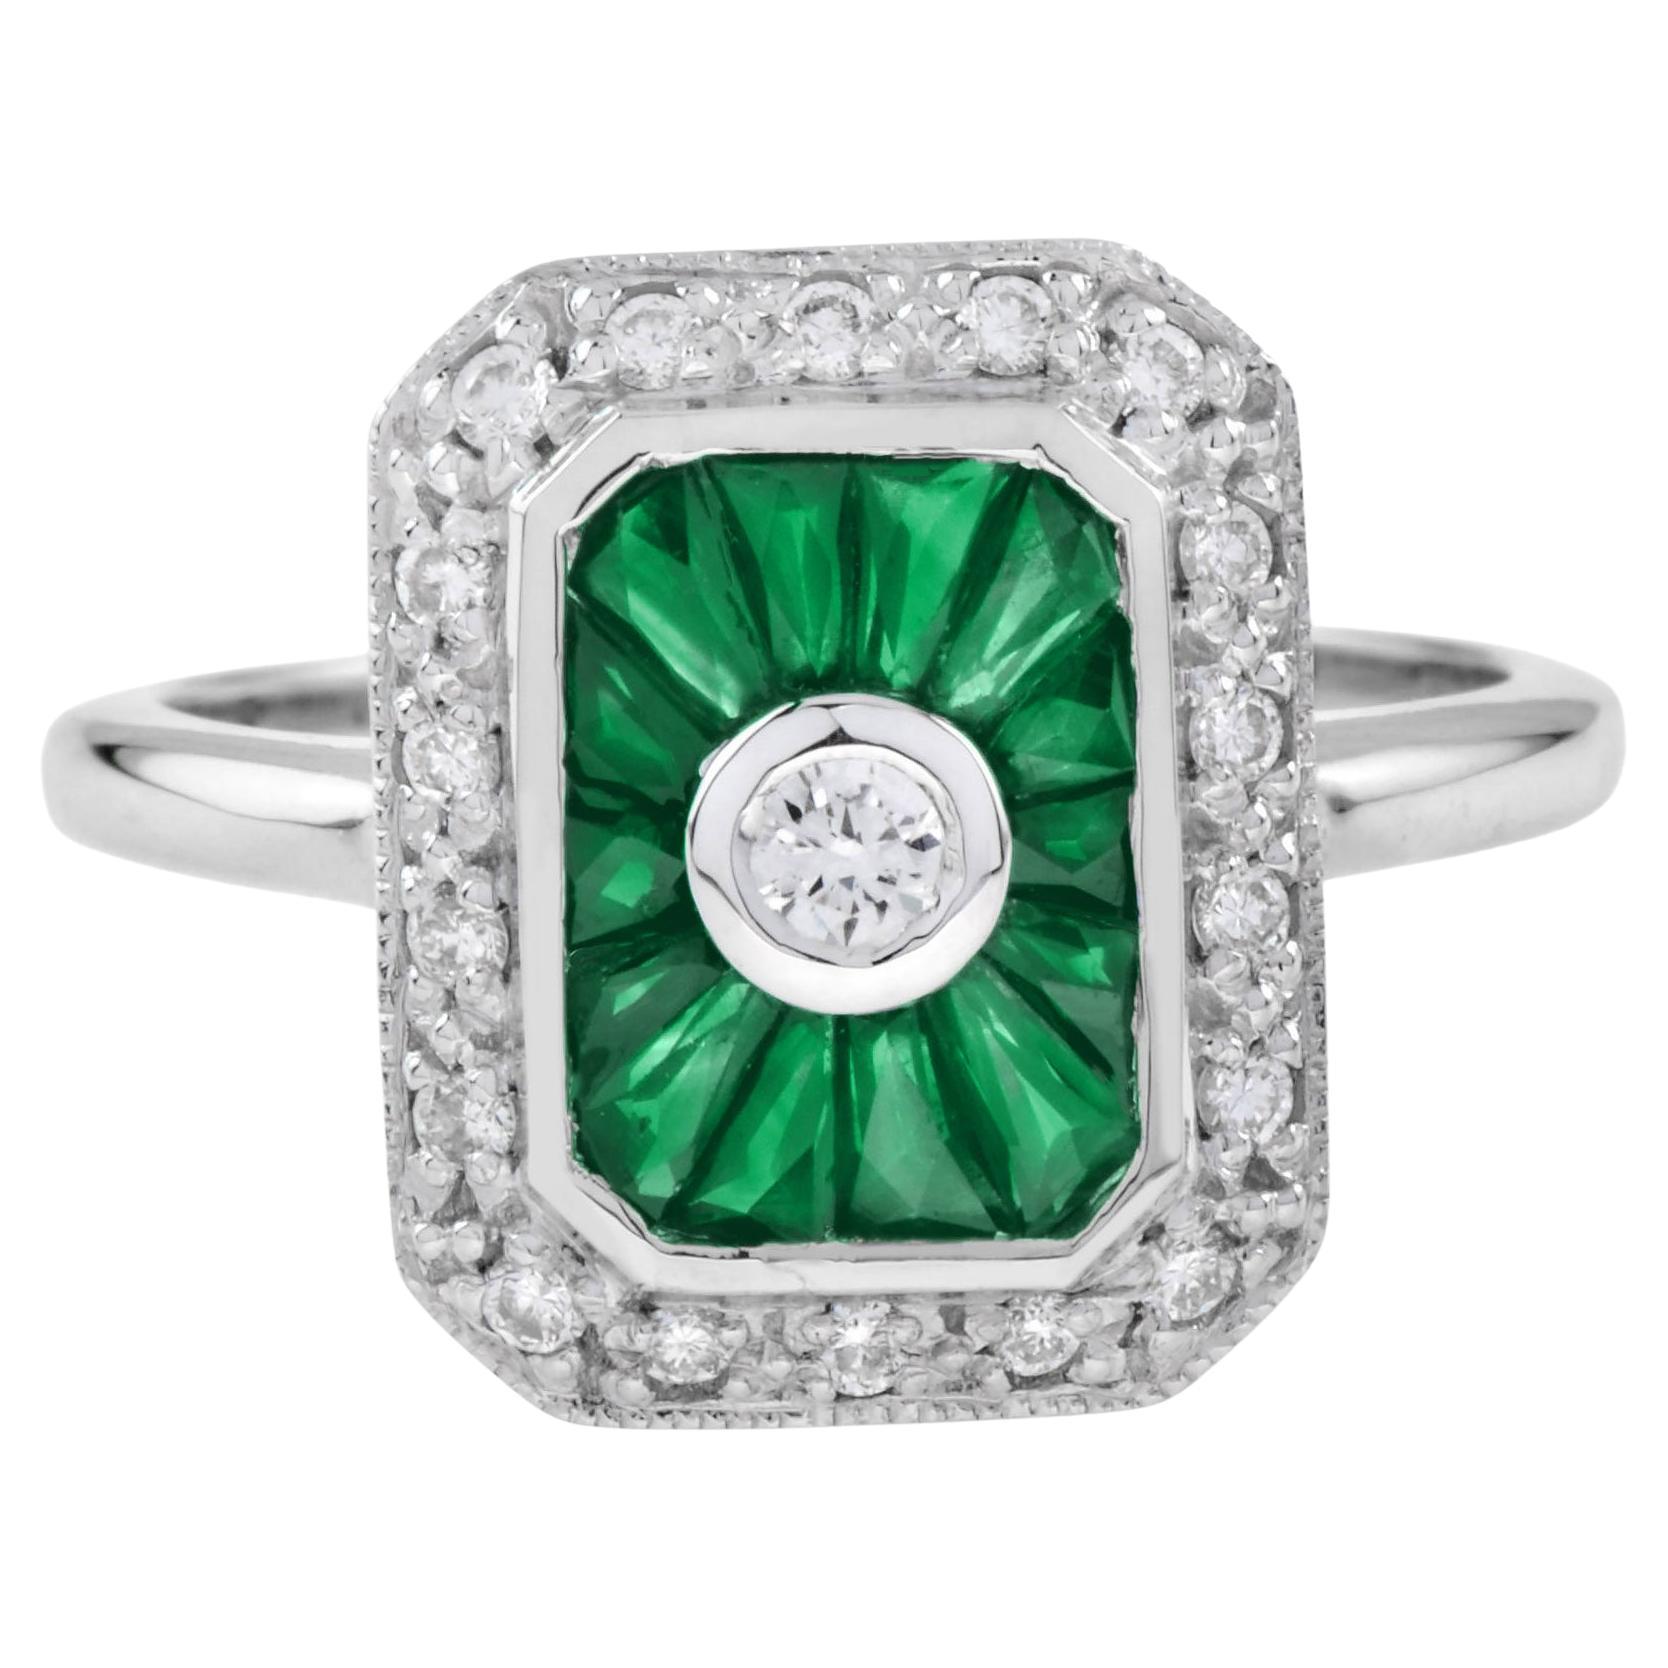 For Sale:  Diamond and Emerald Halo Art Deco Style Engagement Ring in 14K White Gold